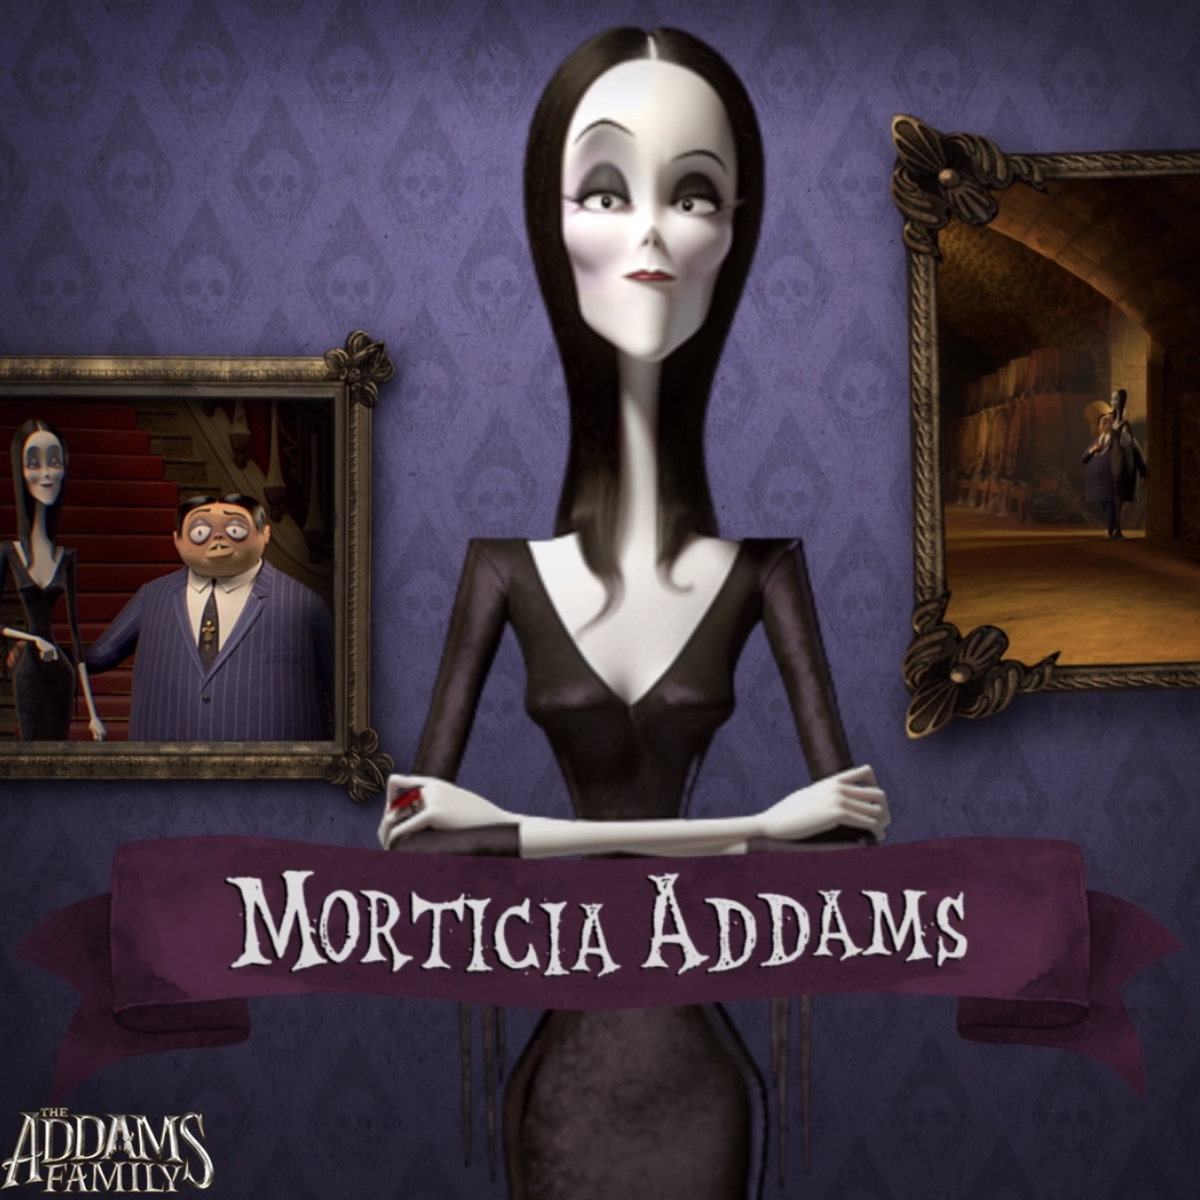 22 Facts About Morticia Addams (The Addams Family) - Facts.net